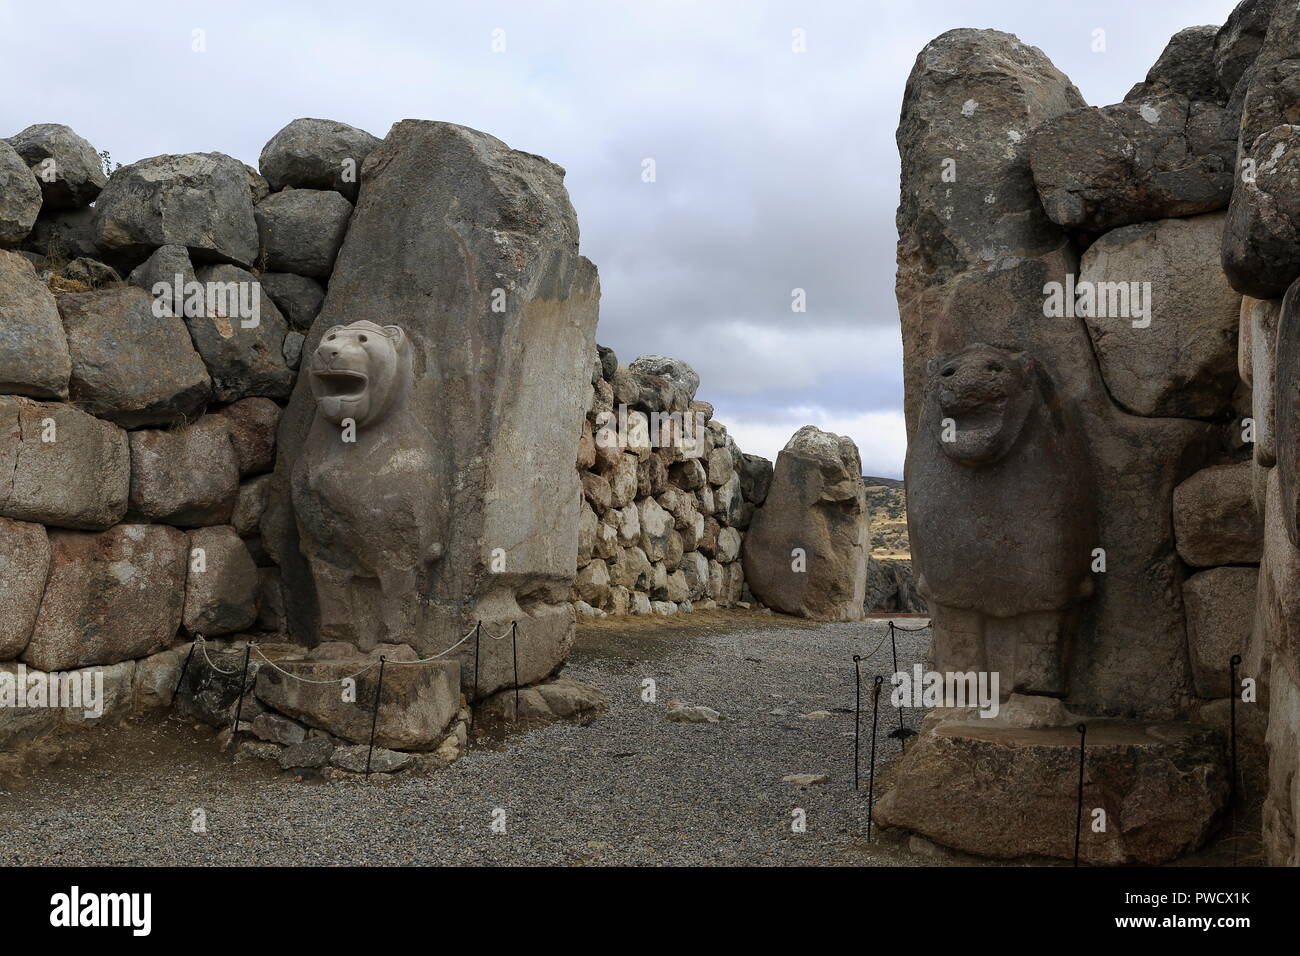 Hattusha, the capital of the Hittite empire in the world heritage of Unesco, was discovered in Anatolia. Stock Photo